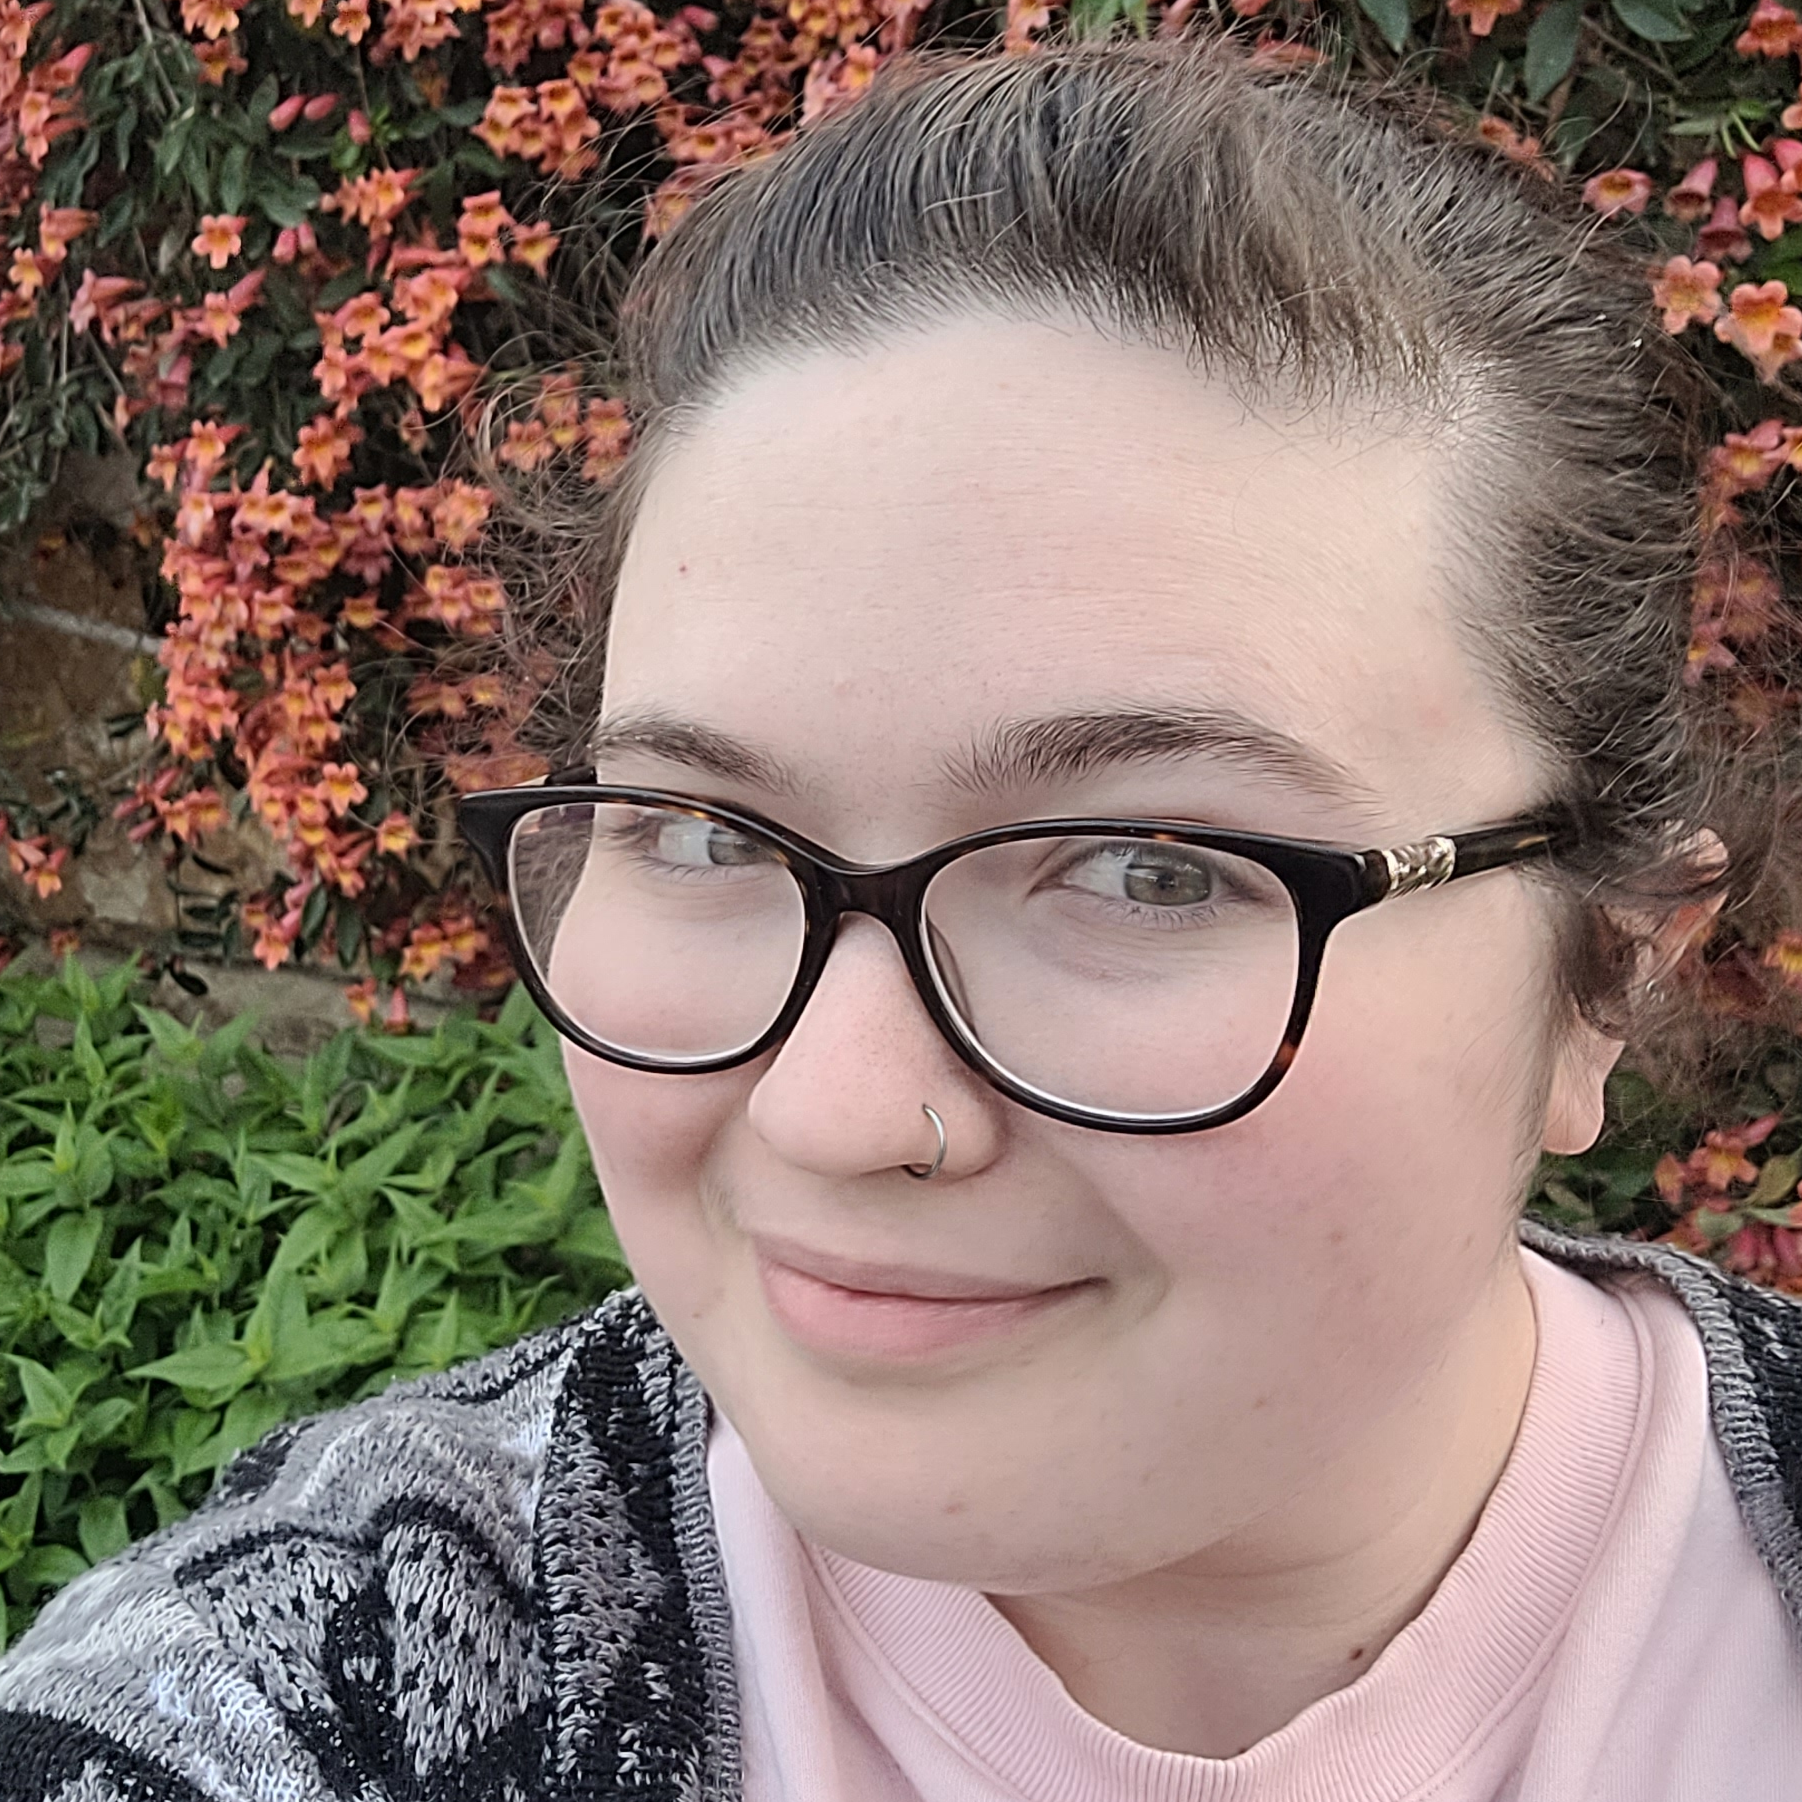 Kristen Wheaton, a smiling white woman with pulled back brown hair, a silver nose-ring and dark glasses. She is wearing a pink sweater and black and grey patterned cardigan while standing outside in front of a stone wall covered in red flowers above and green ivy below.